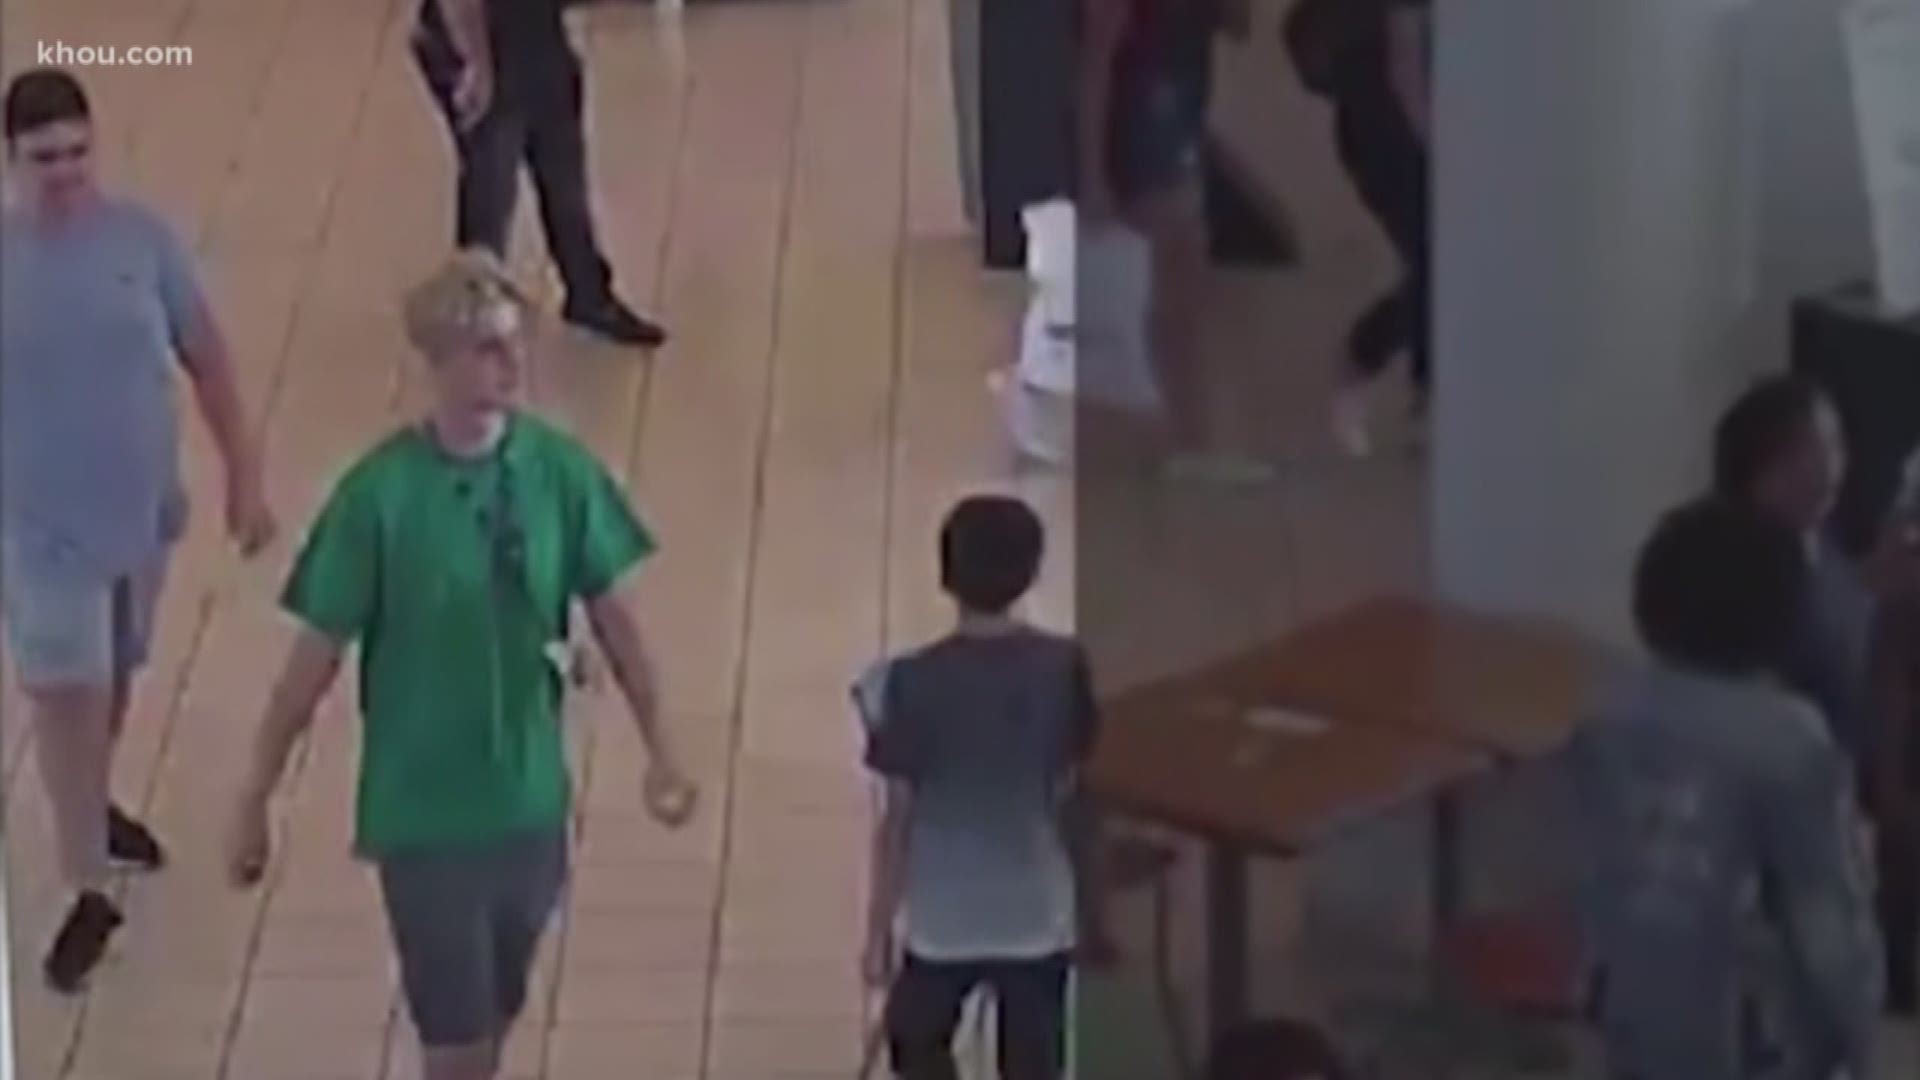 Houston police on Wednesday released surveillance video of the person of interest in Sunday's incident that panicked shoppers at Memorial City Mall.